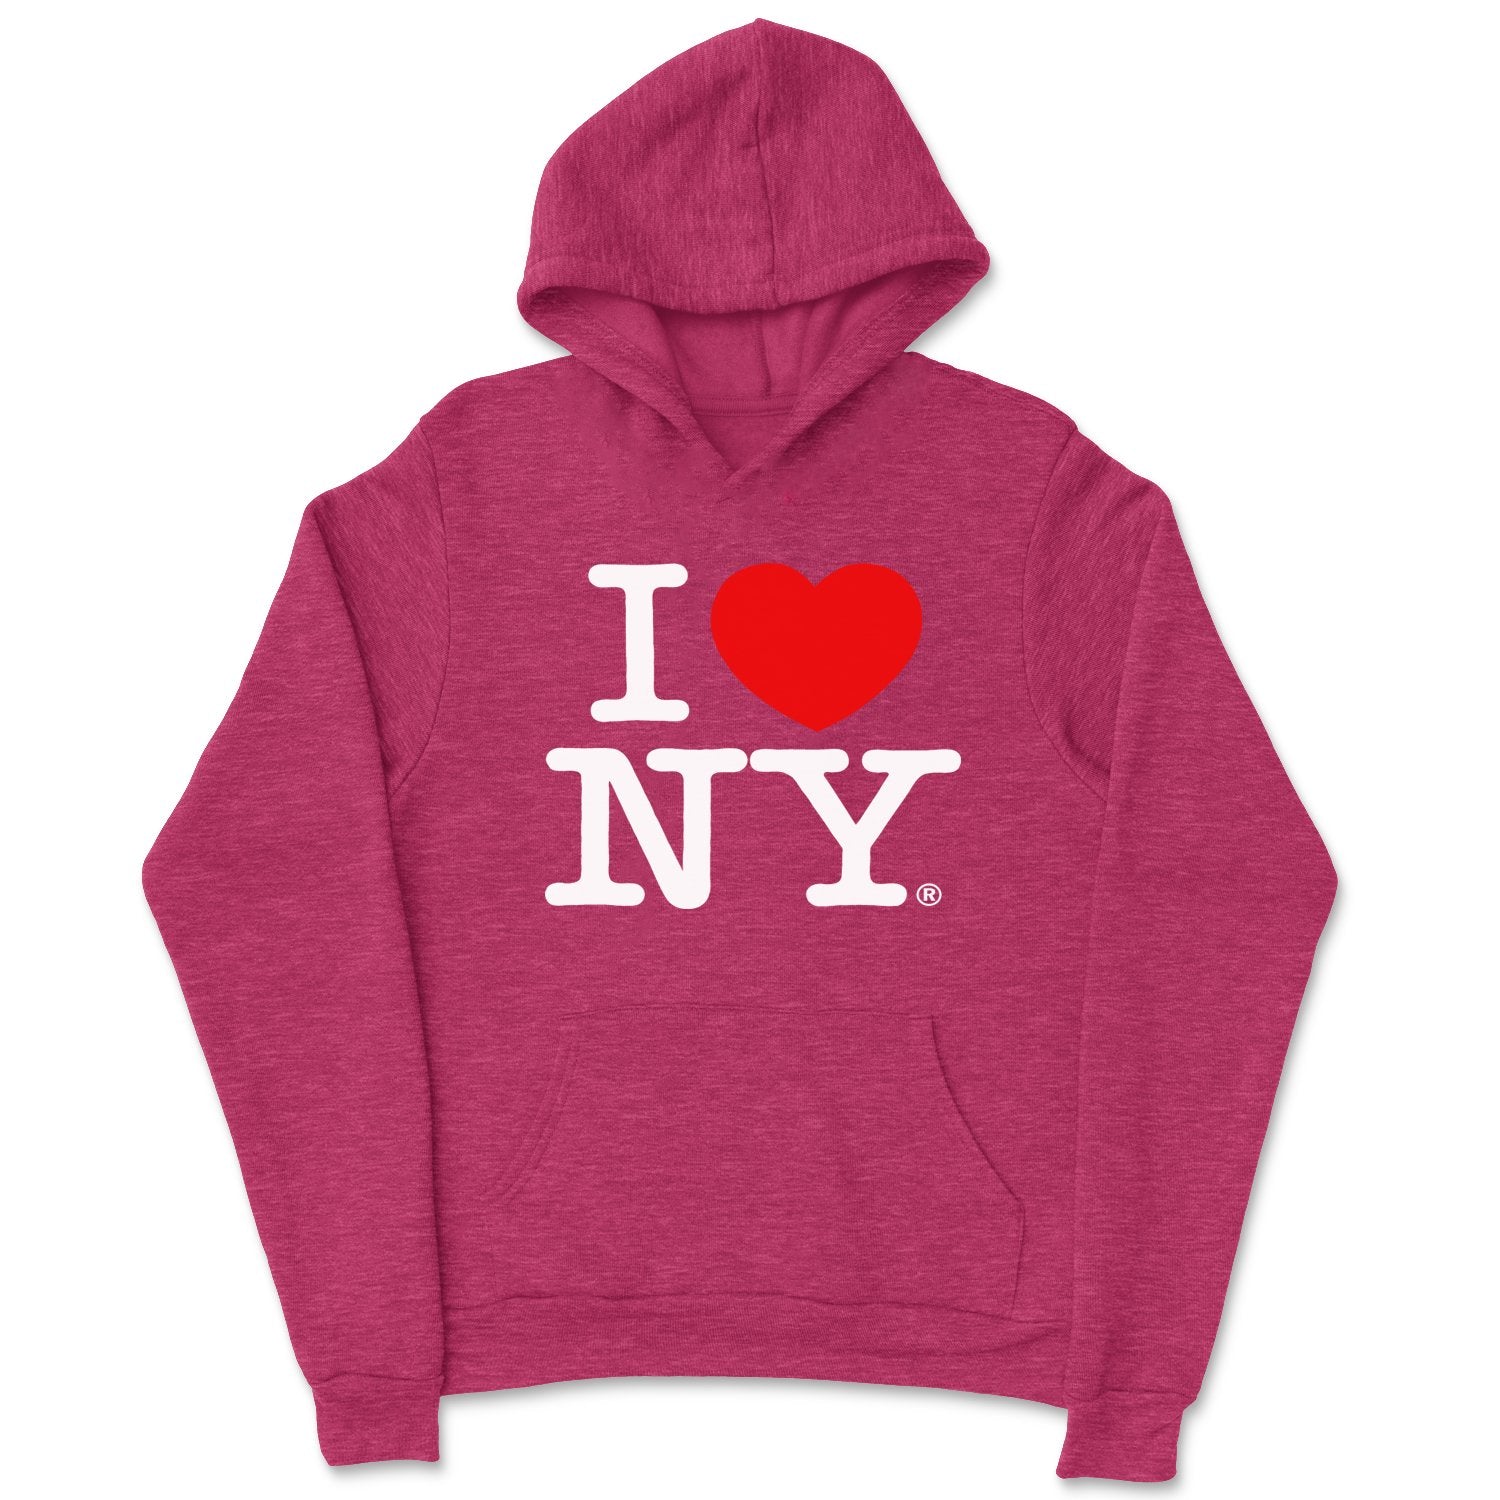 I Love NY Kids Hoodie Sweatshirt Officially Licensed (Youth, Heather Burgundy)